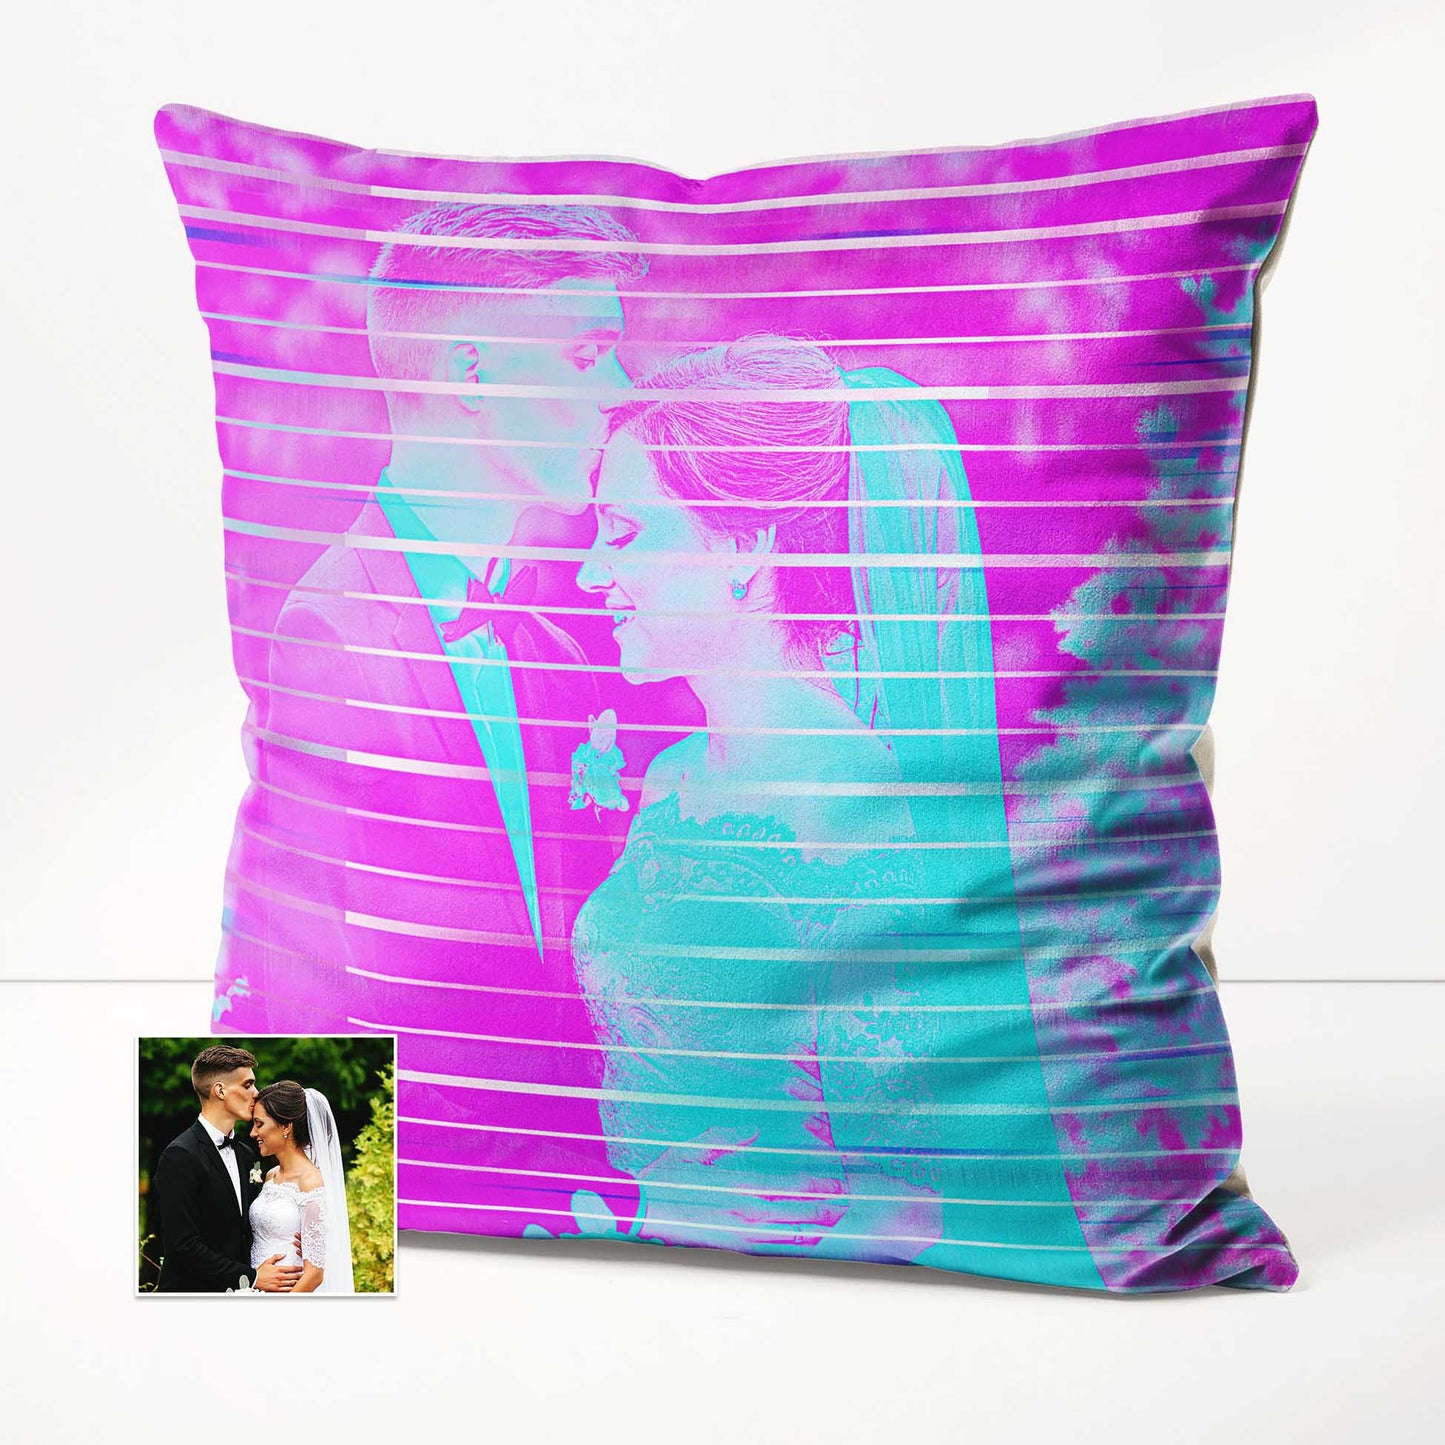 Transform your living space with the Personalised Purple and Blue Cushion. Its sharp and vibrant colors bring a modern and sophisticated touch to any room. Crafted from soft velvet, this cushion provides a comfortable and luxurious feel